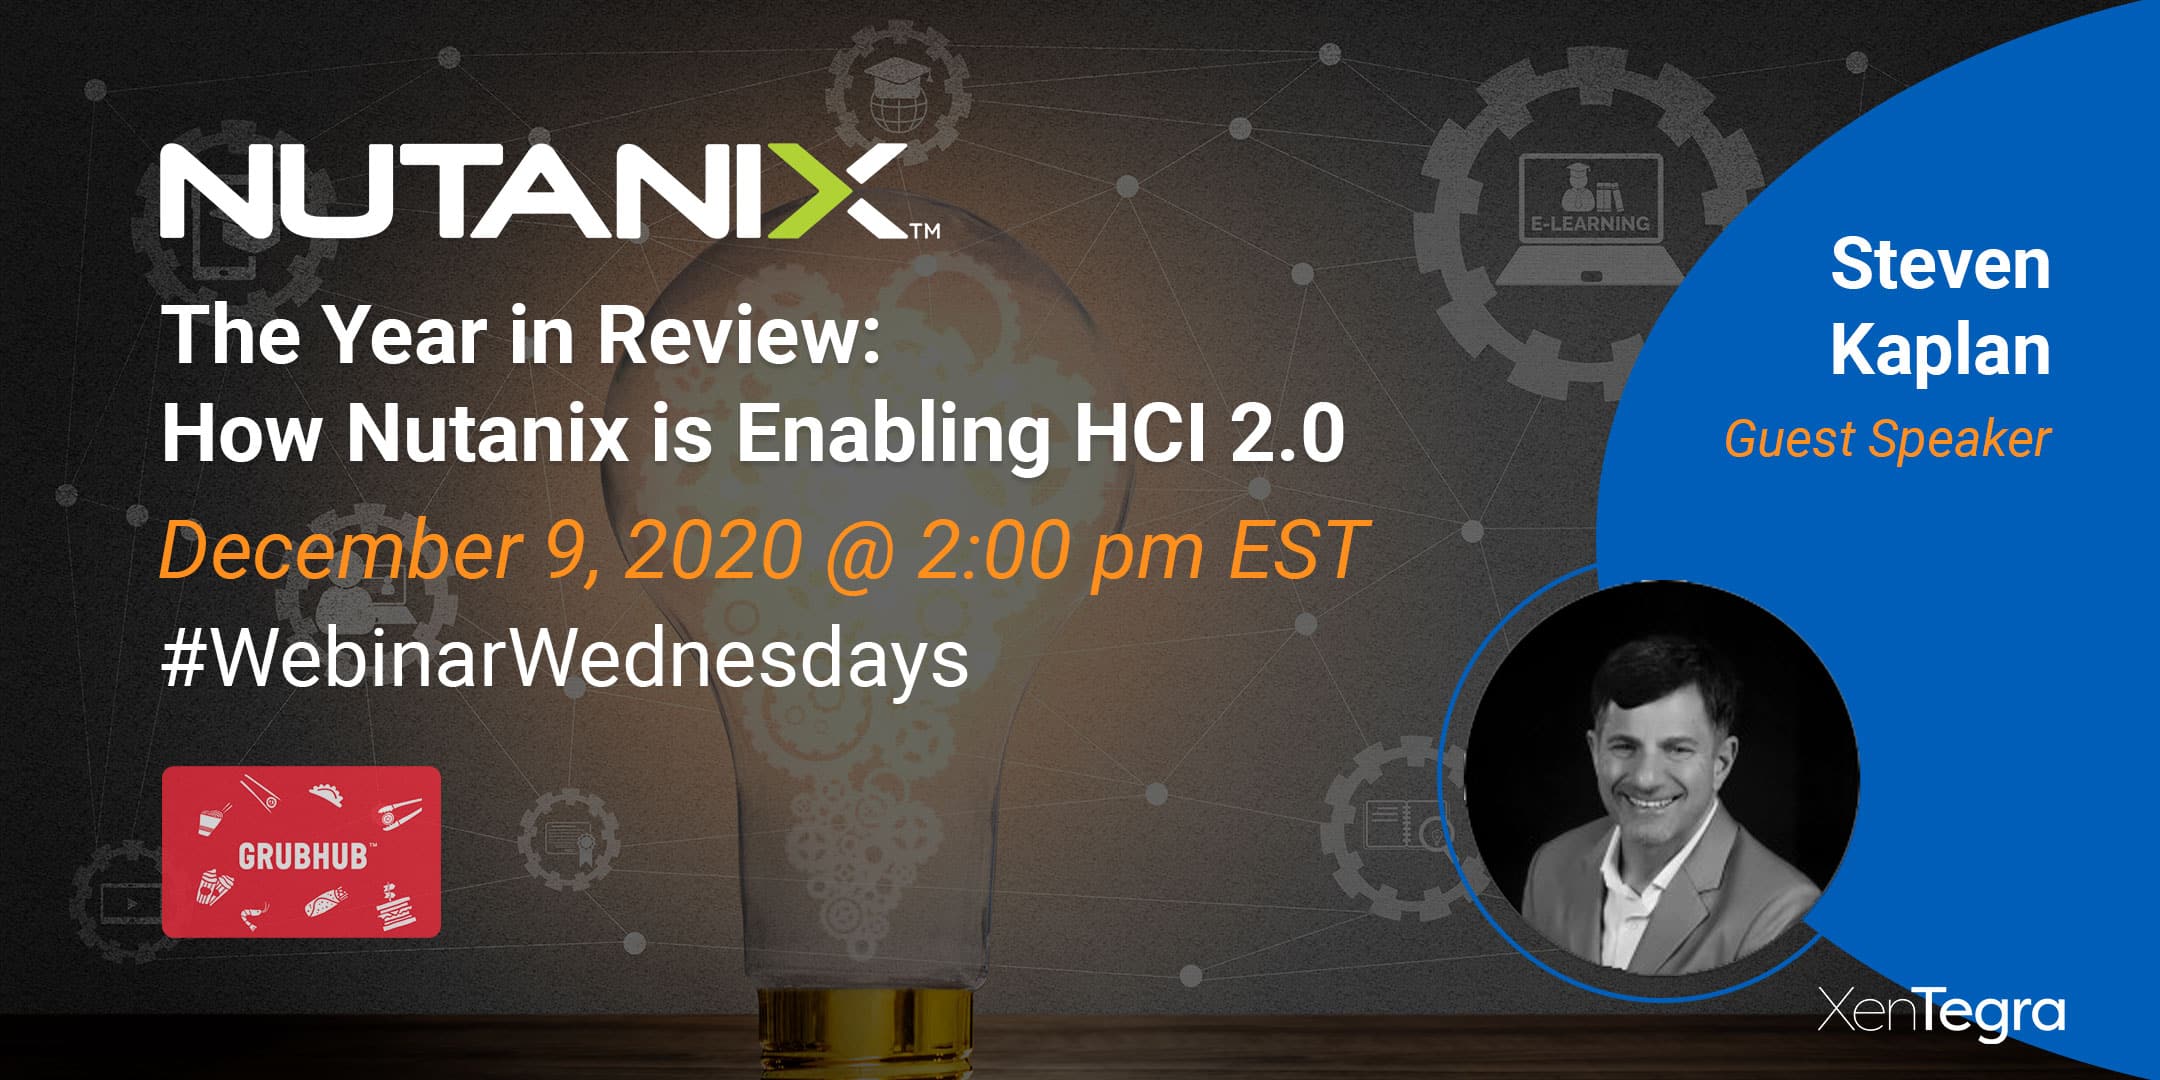 The Year in Review: How Nutanix is Enabling HCI 2.0 with Steve Kaplan